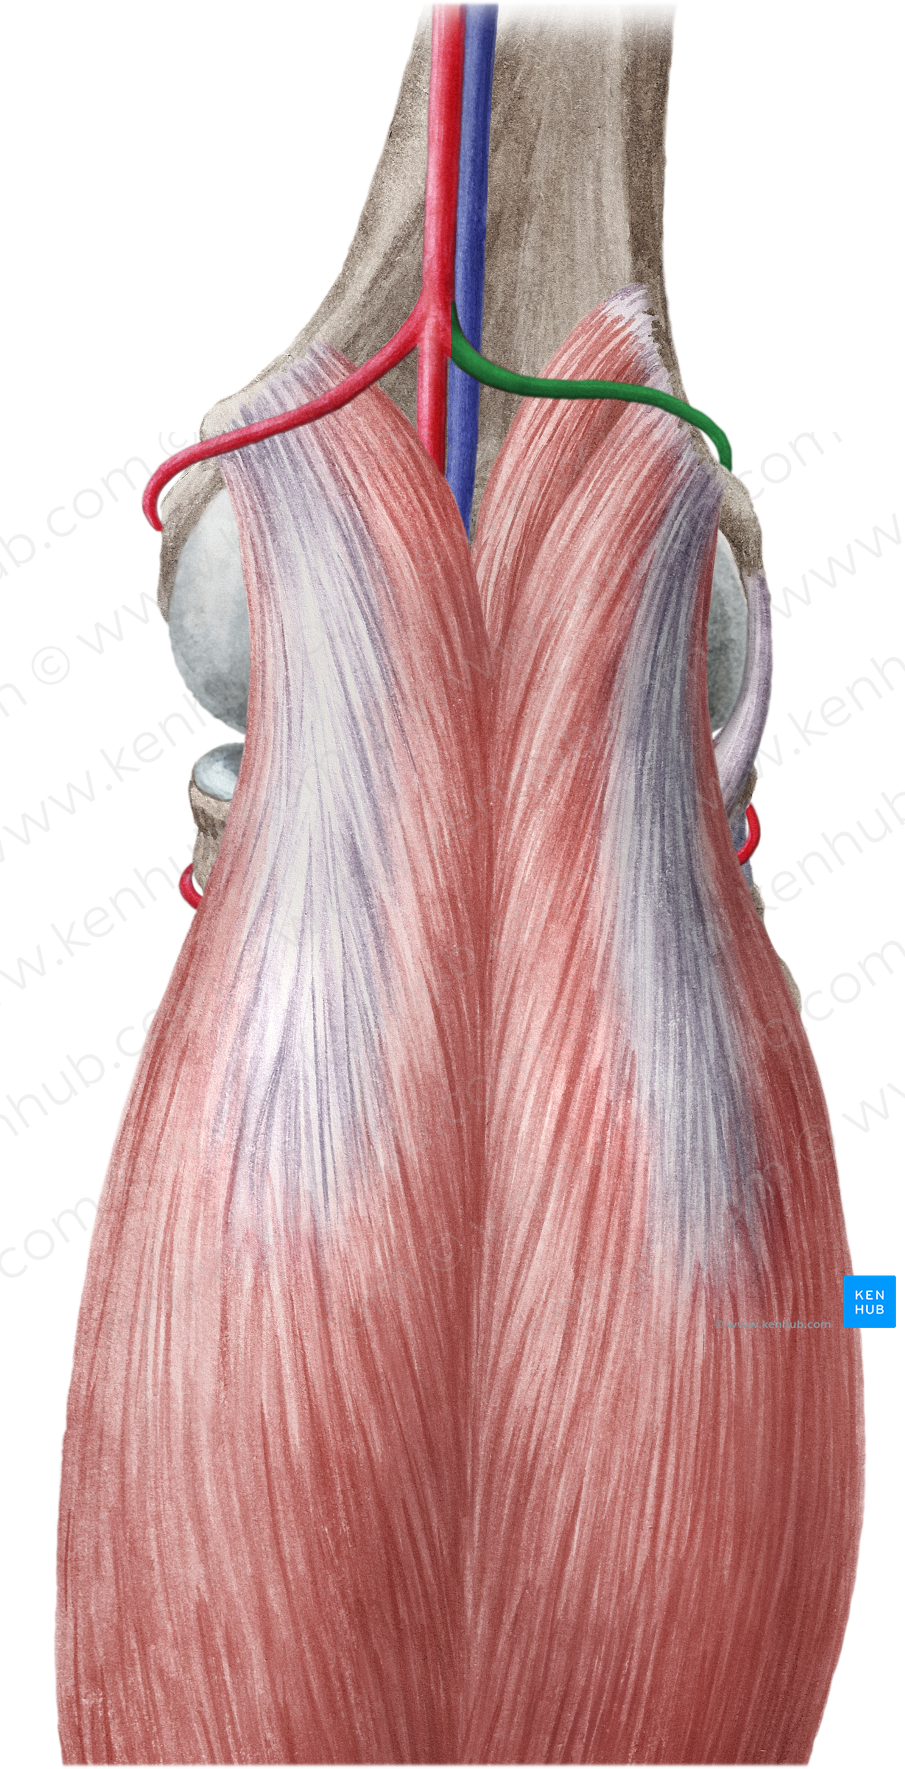 Superior lateral genicular artery (#1854)